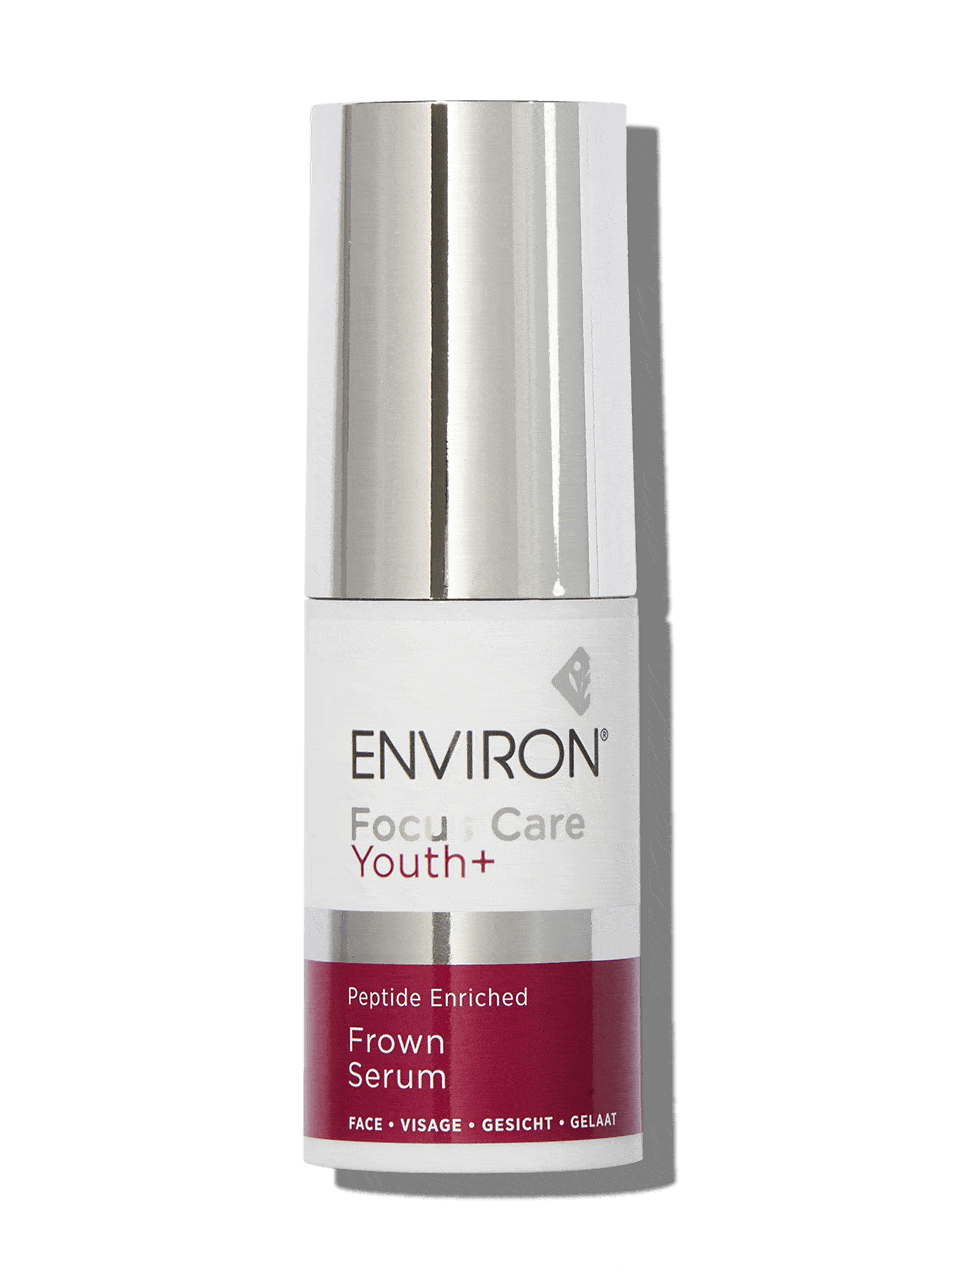 Peptide Enriched Frown Serum SKINCARE Environ 